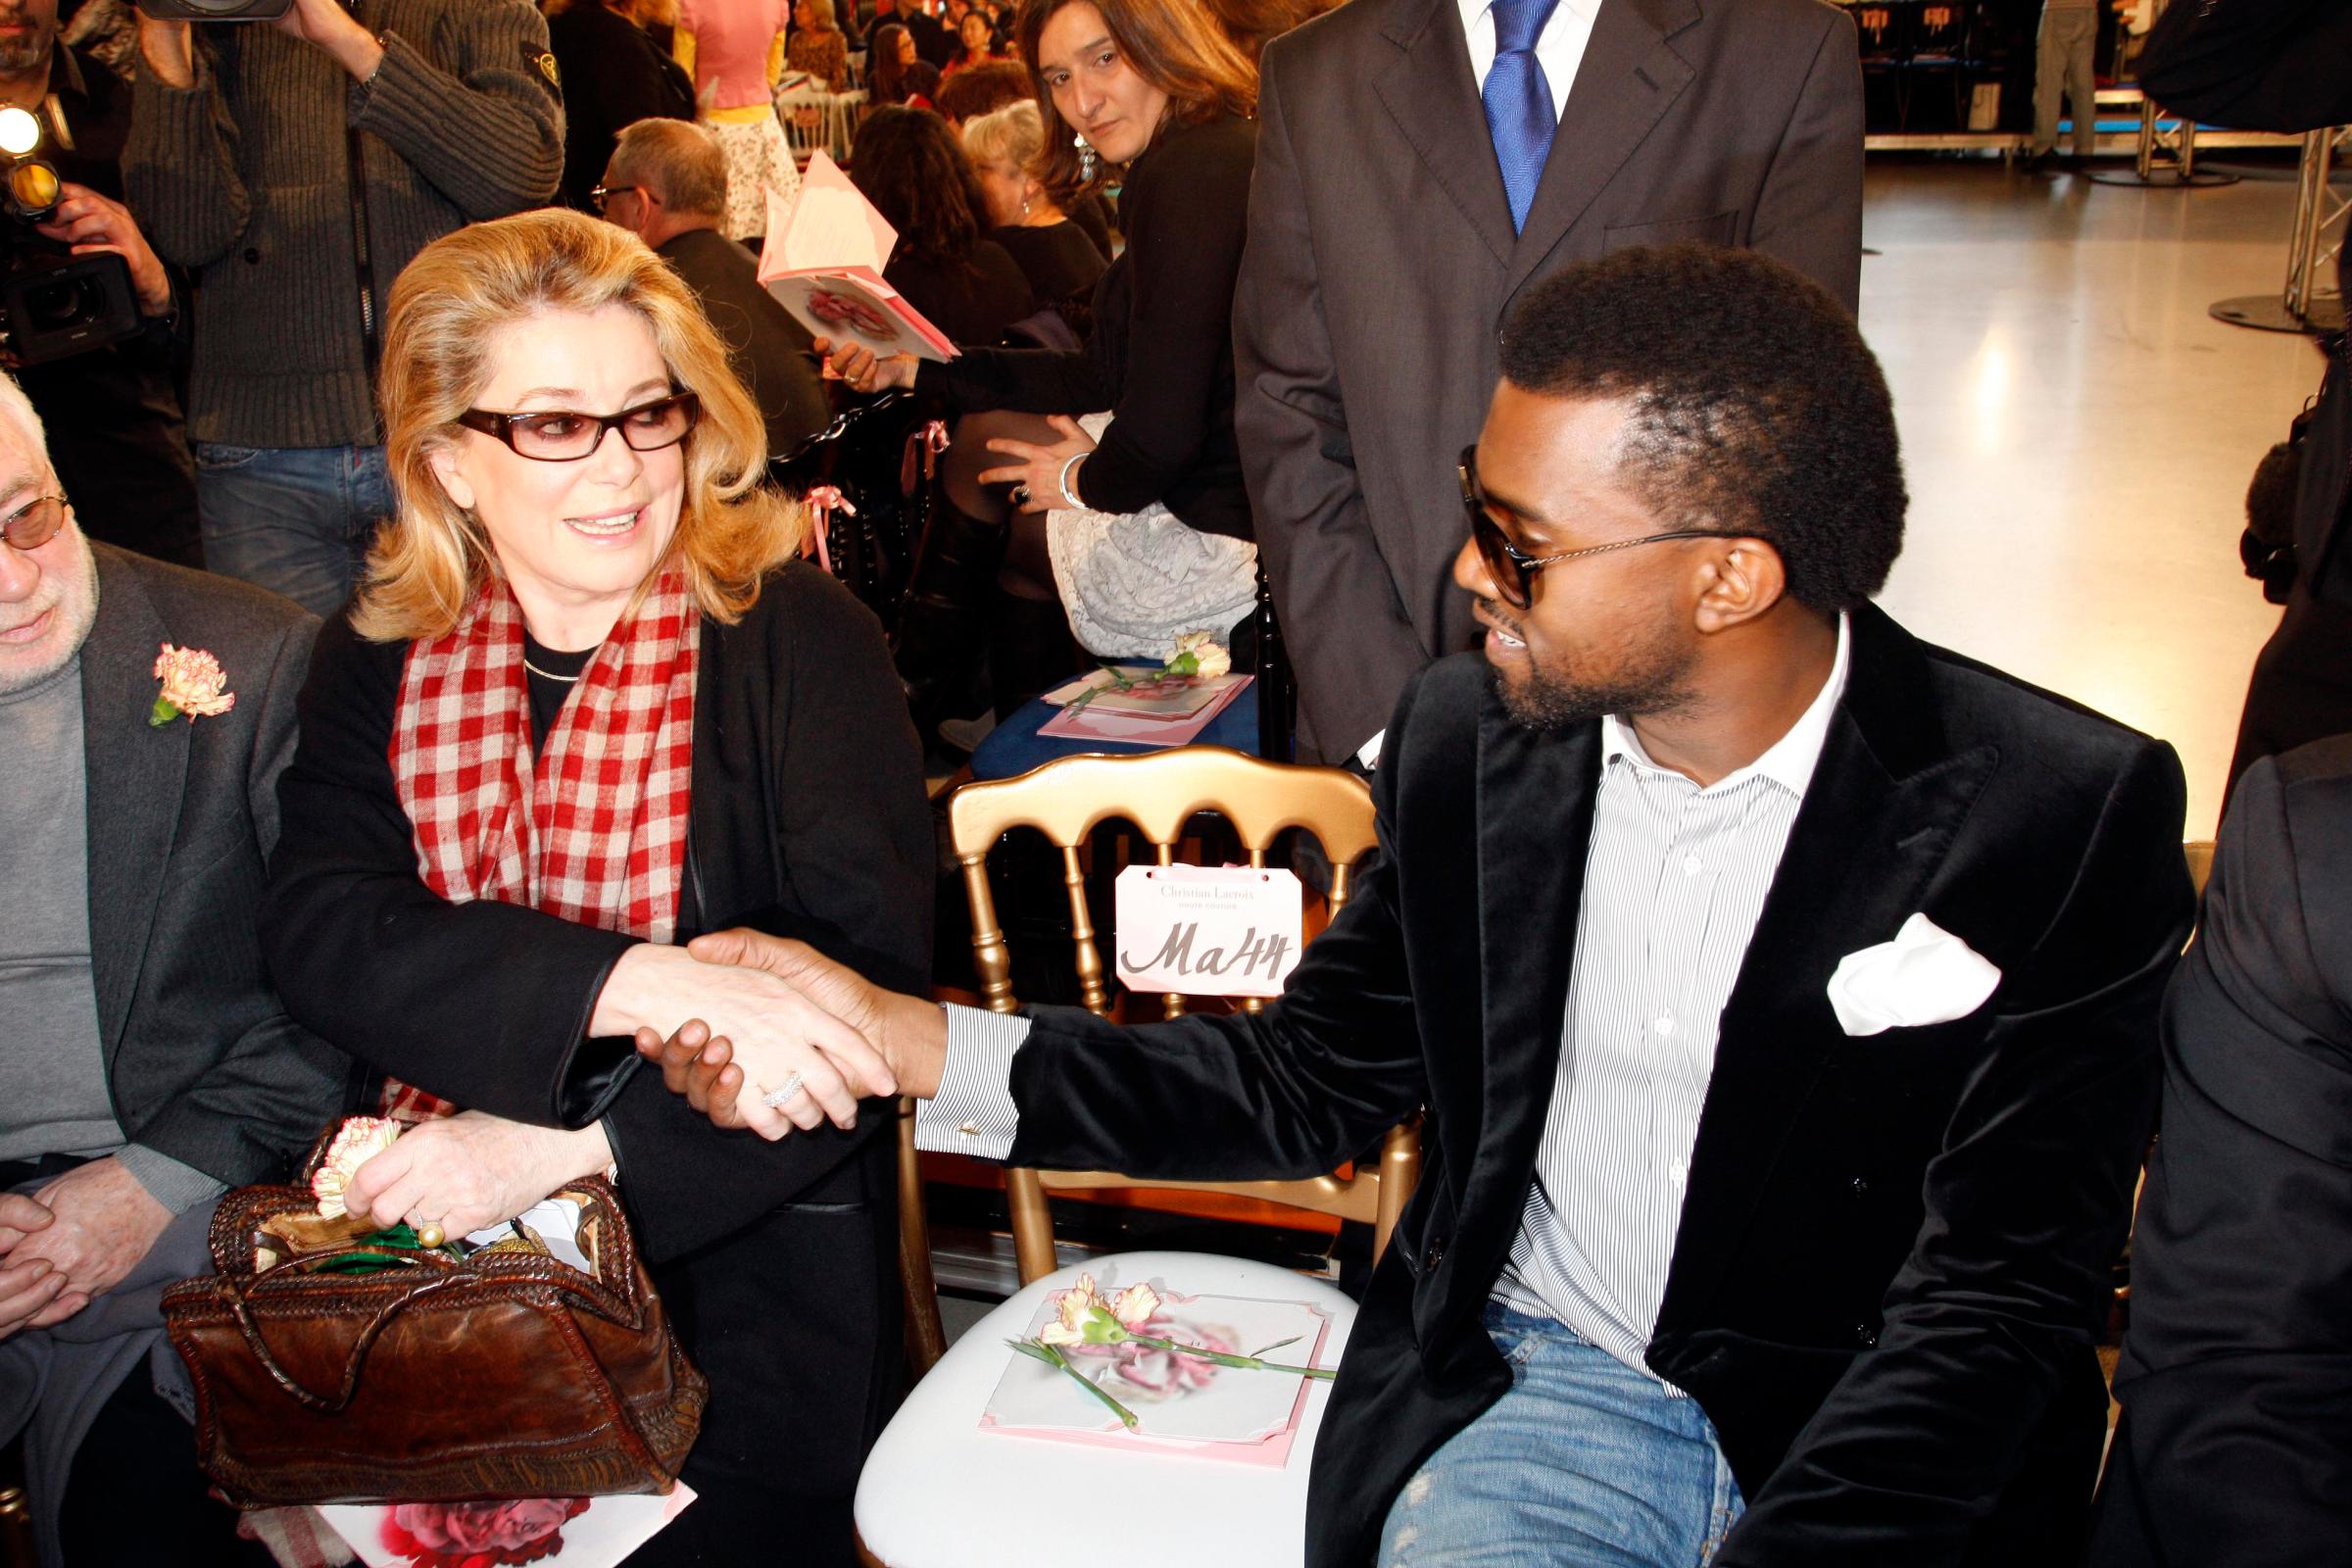 Catherine Deneuve and Kanye West at the Christian Lacroix Spring 2009 couture show.